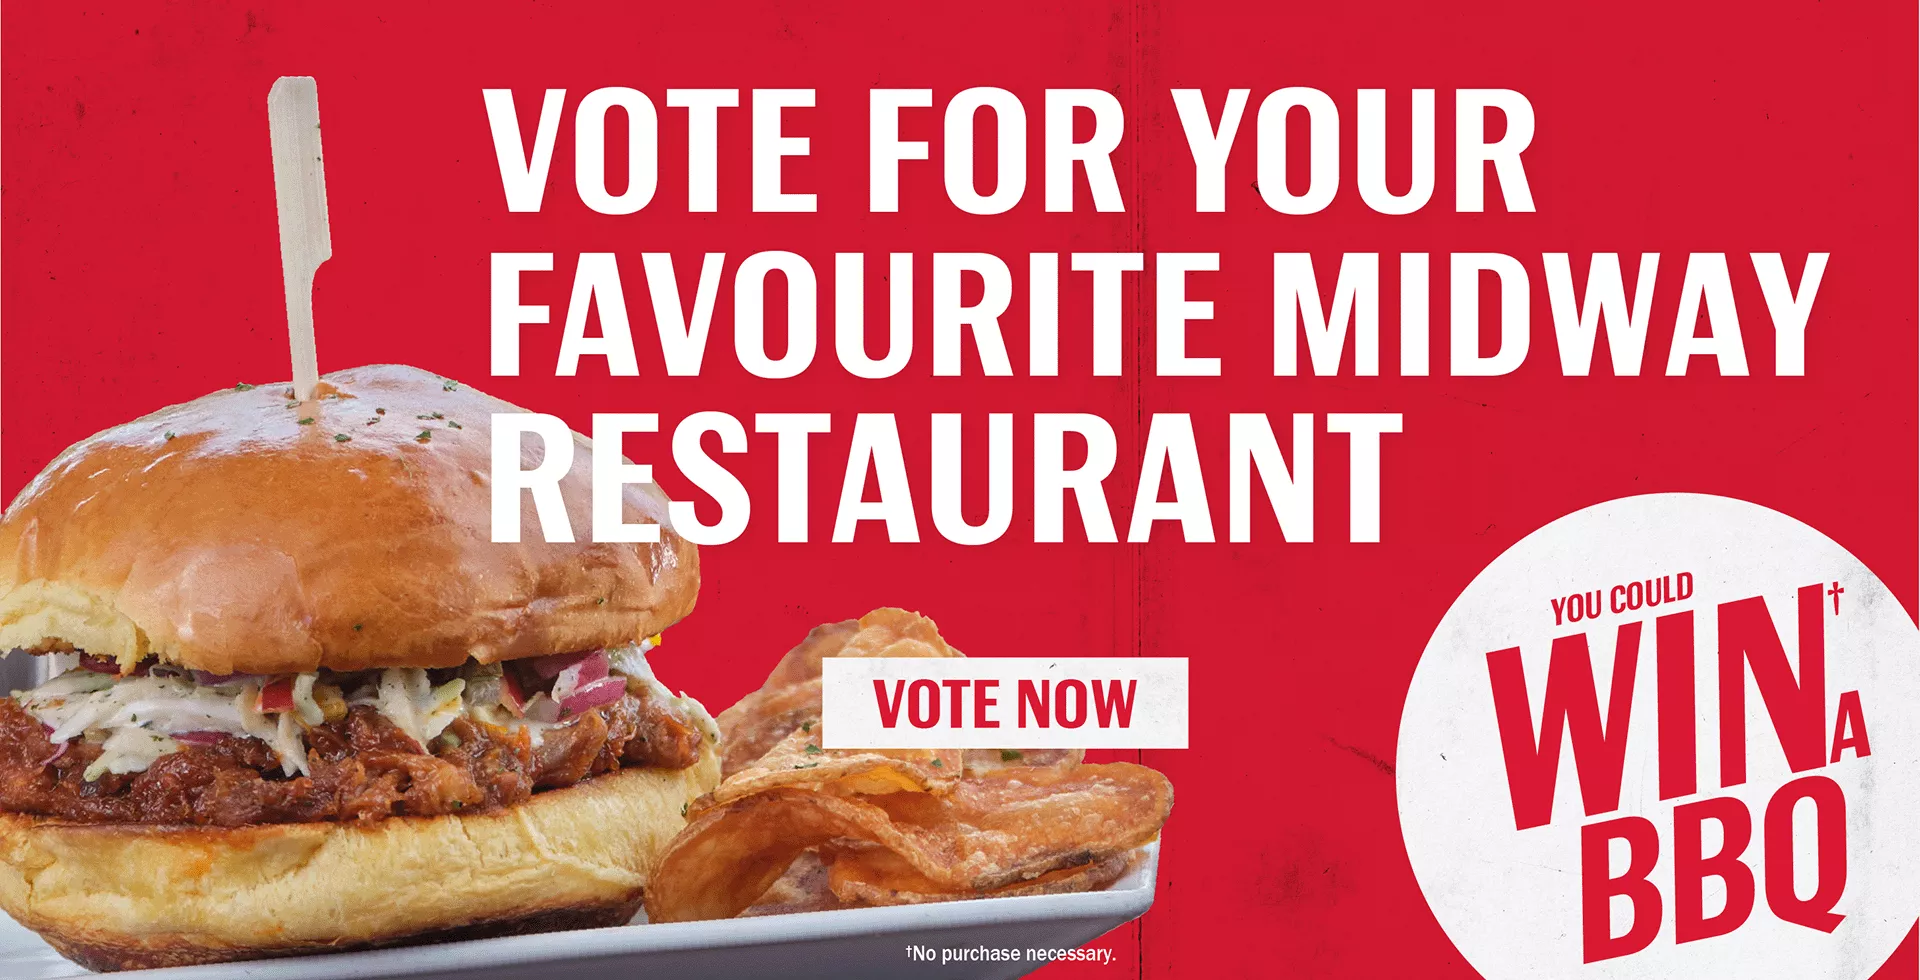 Vote for your favorite Midway Restaurant